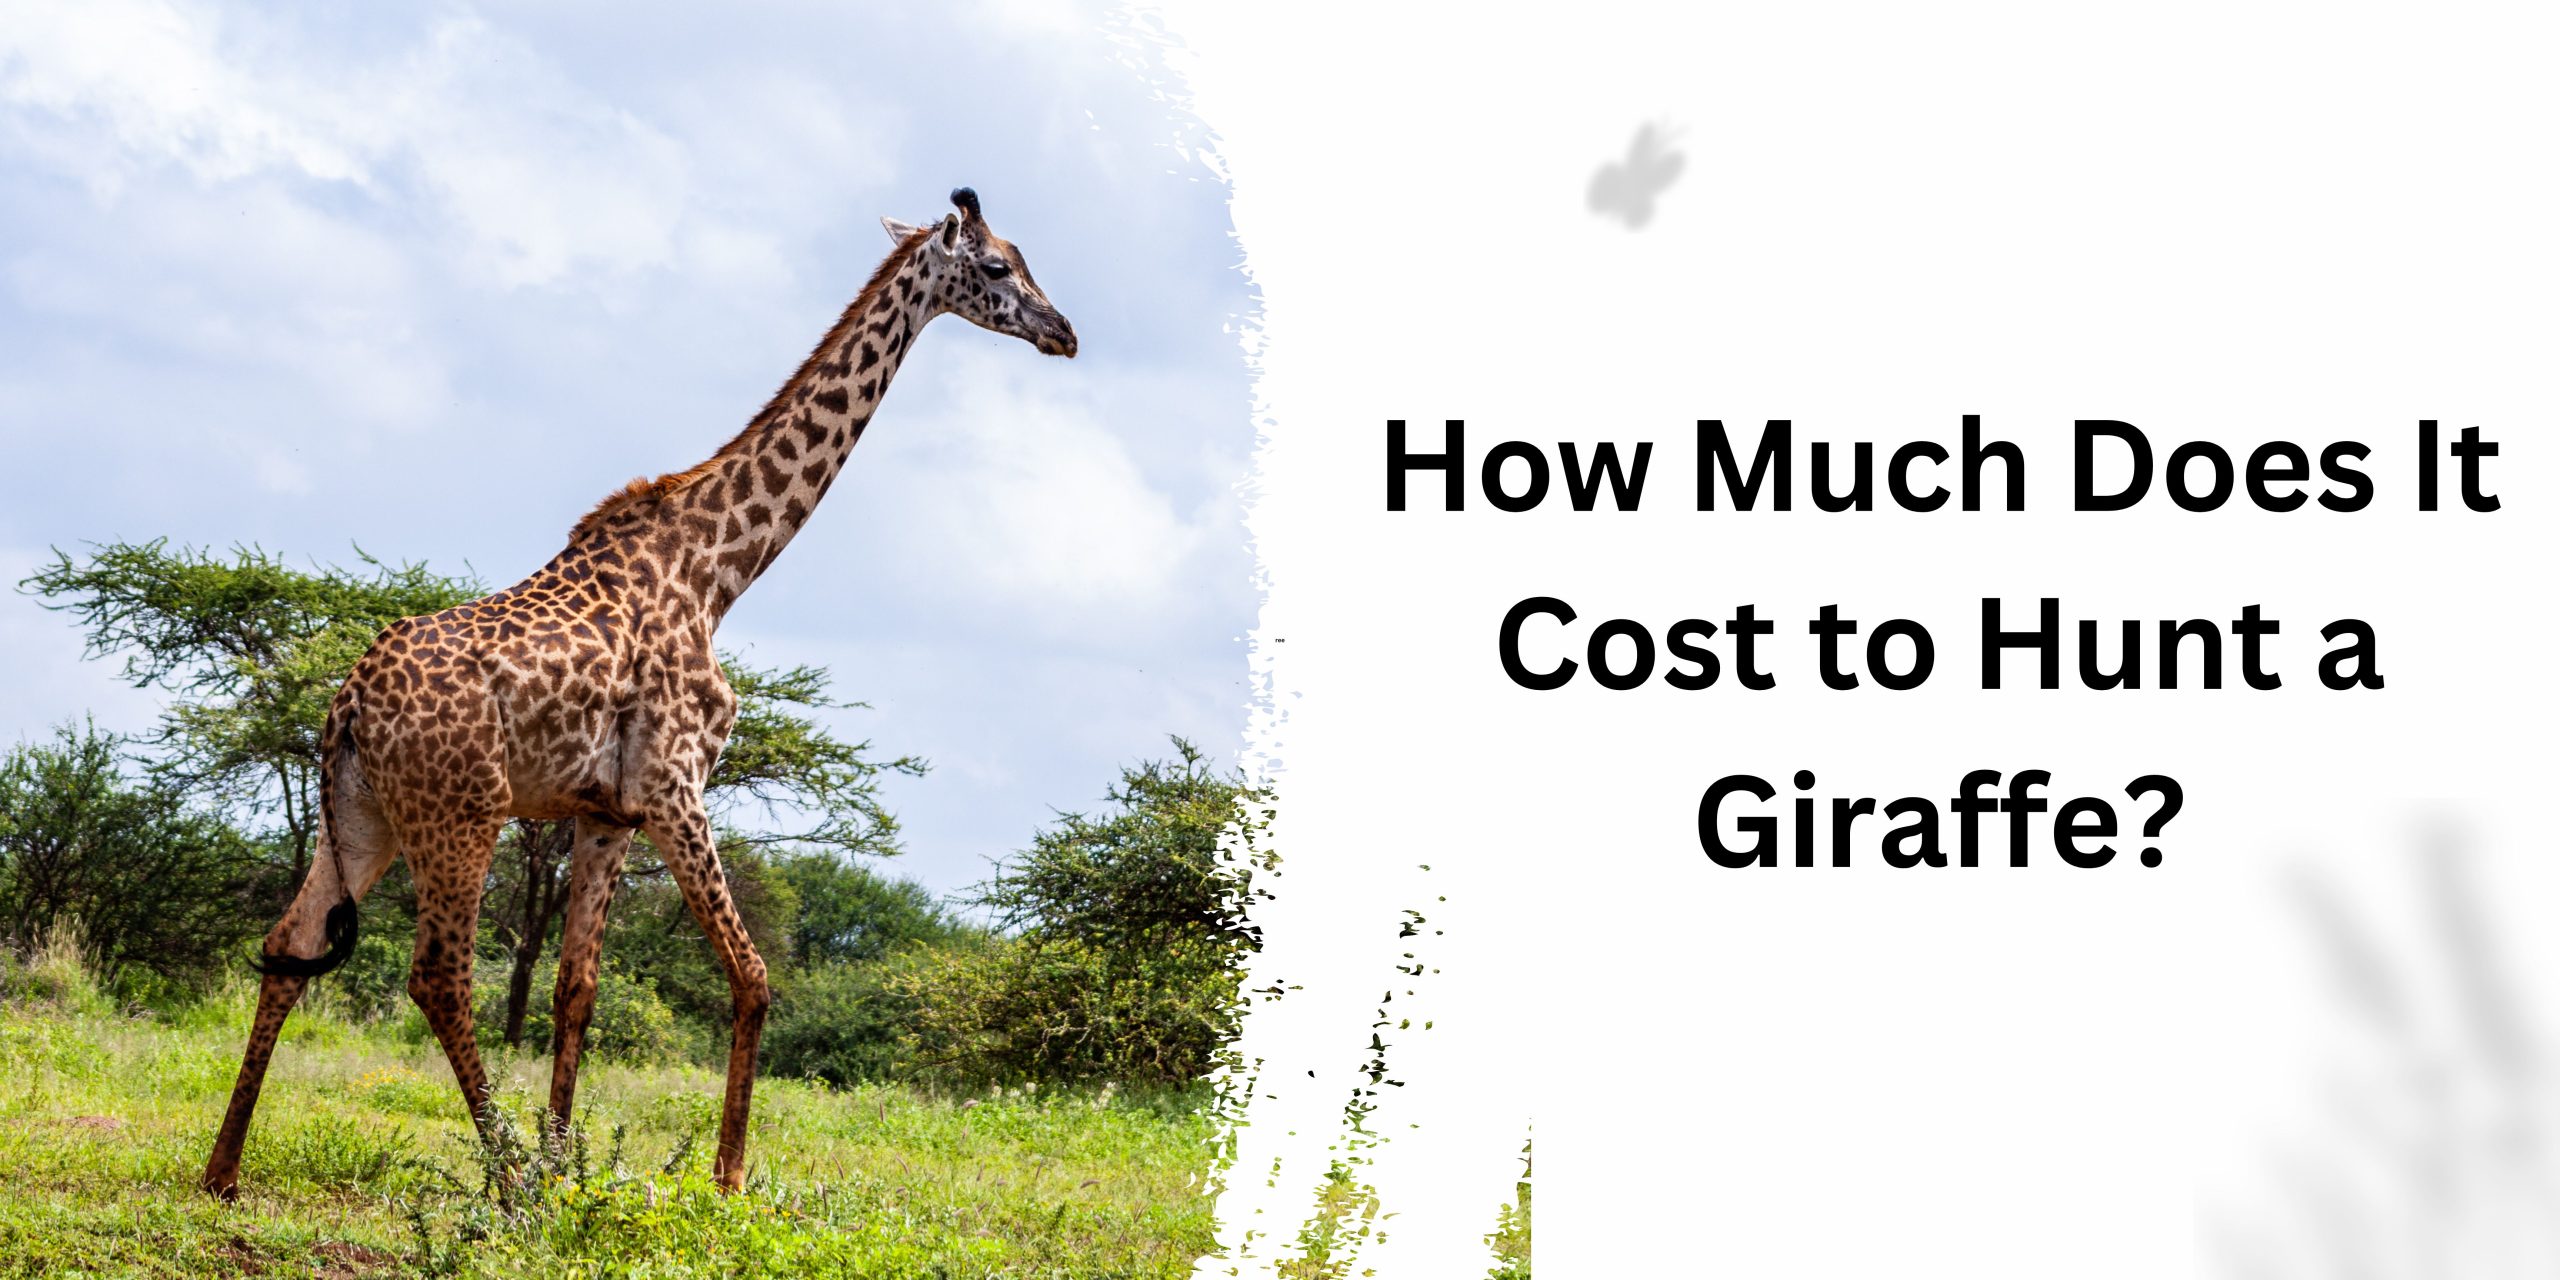 How Much Does It Cost to Hunt a Giraffe